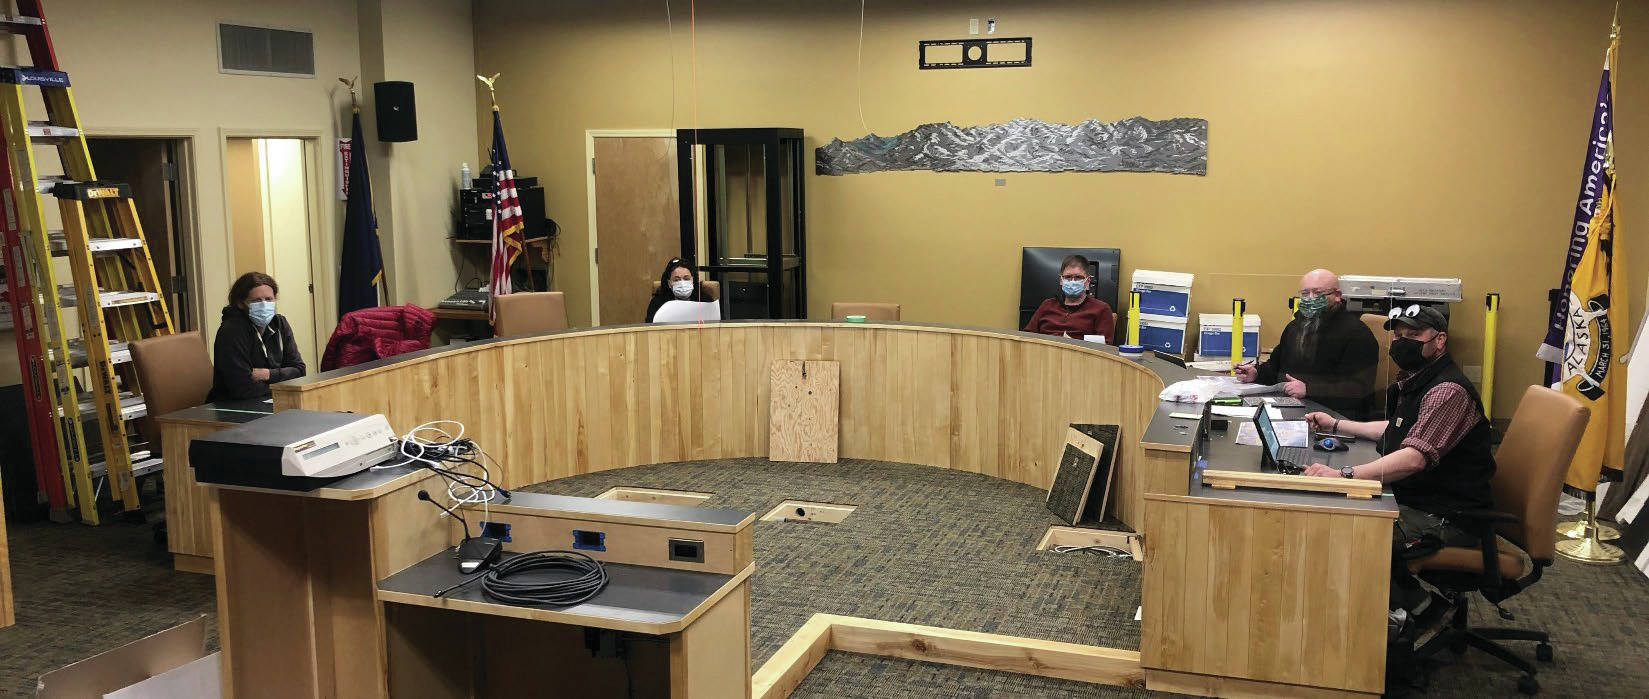 City of Homer staff hold a meeting in the Cowles Council Chambers at Homer City Hall in this undated photo. The chambers are being remodeled to allow COVID-safe public meetings. (Photo courtesy of City of Homer)